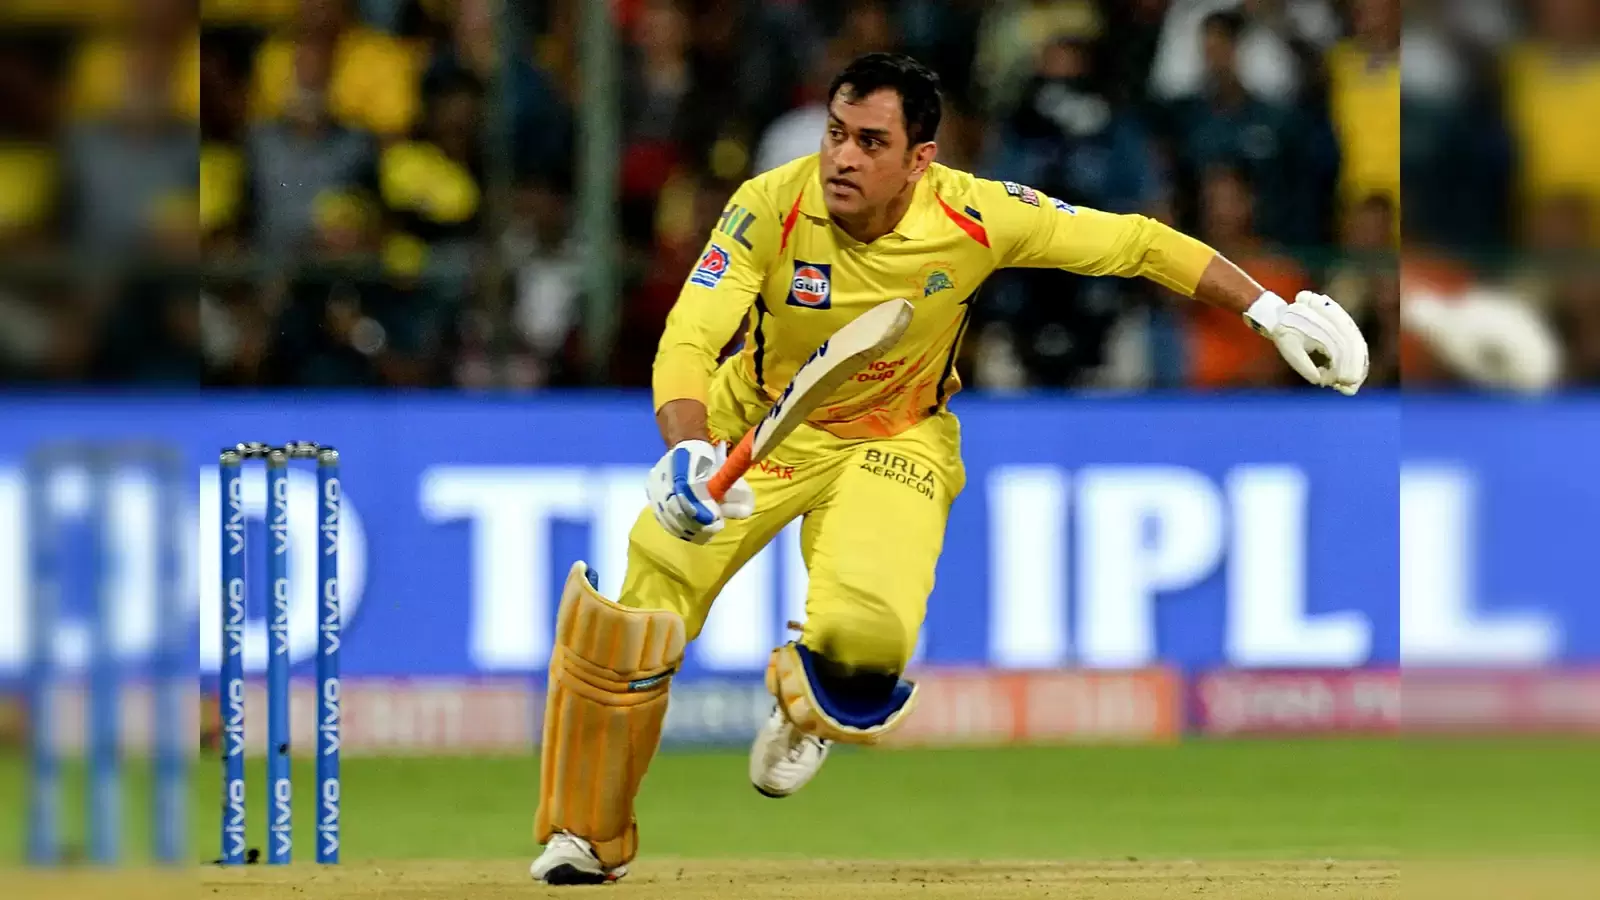 MS Dhoni's CSK also gave crores through electoral bonds, know which party gave the most funding